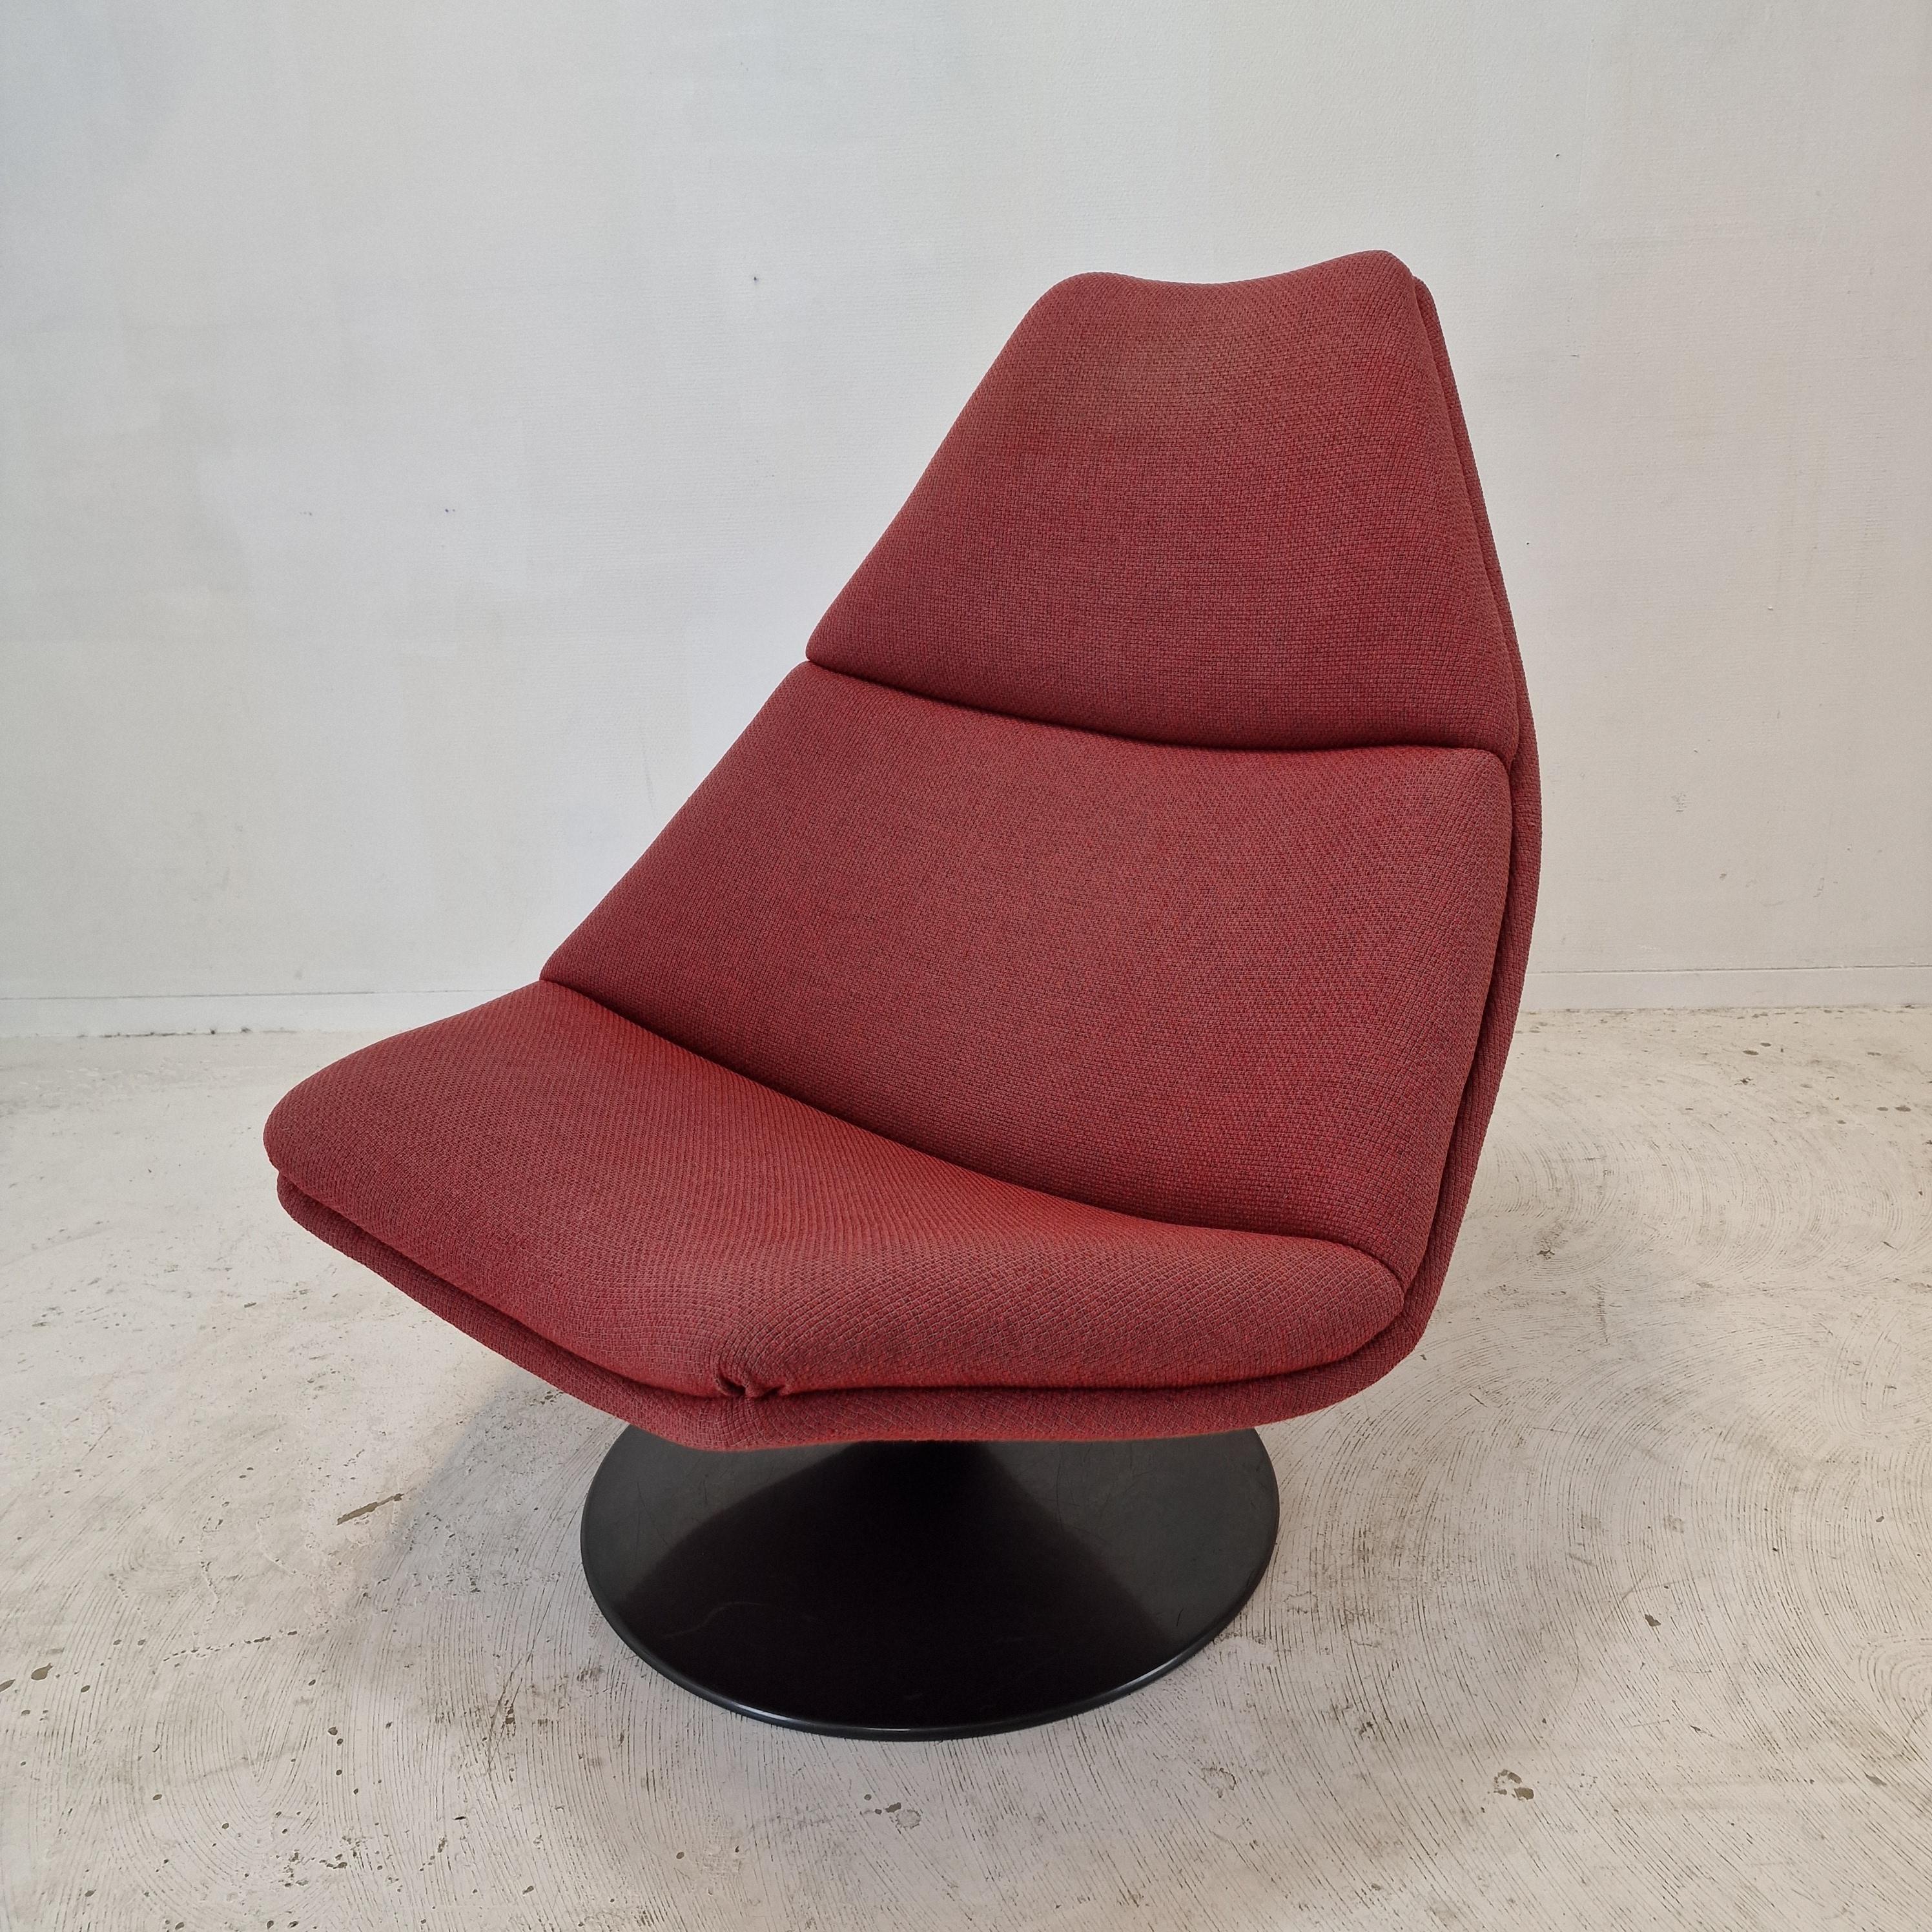 Very comfortable Artifort F510 lounge chair. 
Designed by the famous English designer Geoffrey Harcourt in the 70's. 

Very solid wooden frame with a large pivoting metal foot.

The chair has the original high quality wool fabric, color red.
The